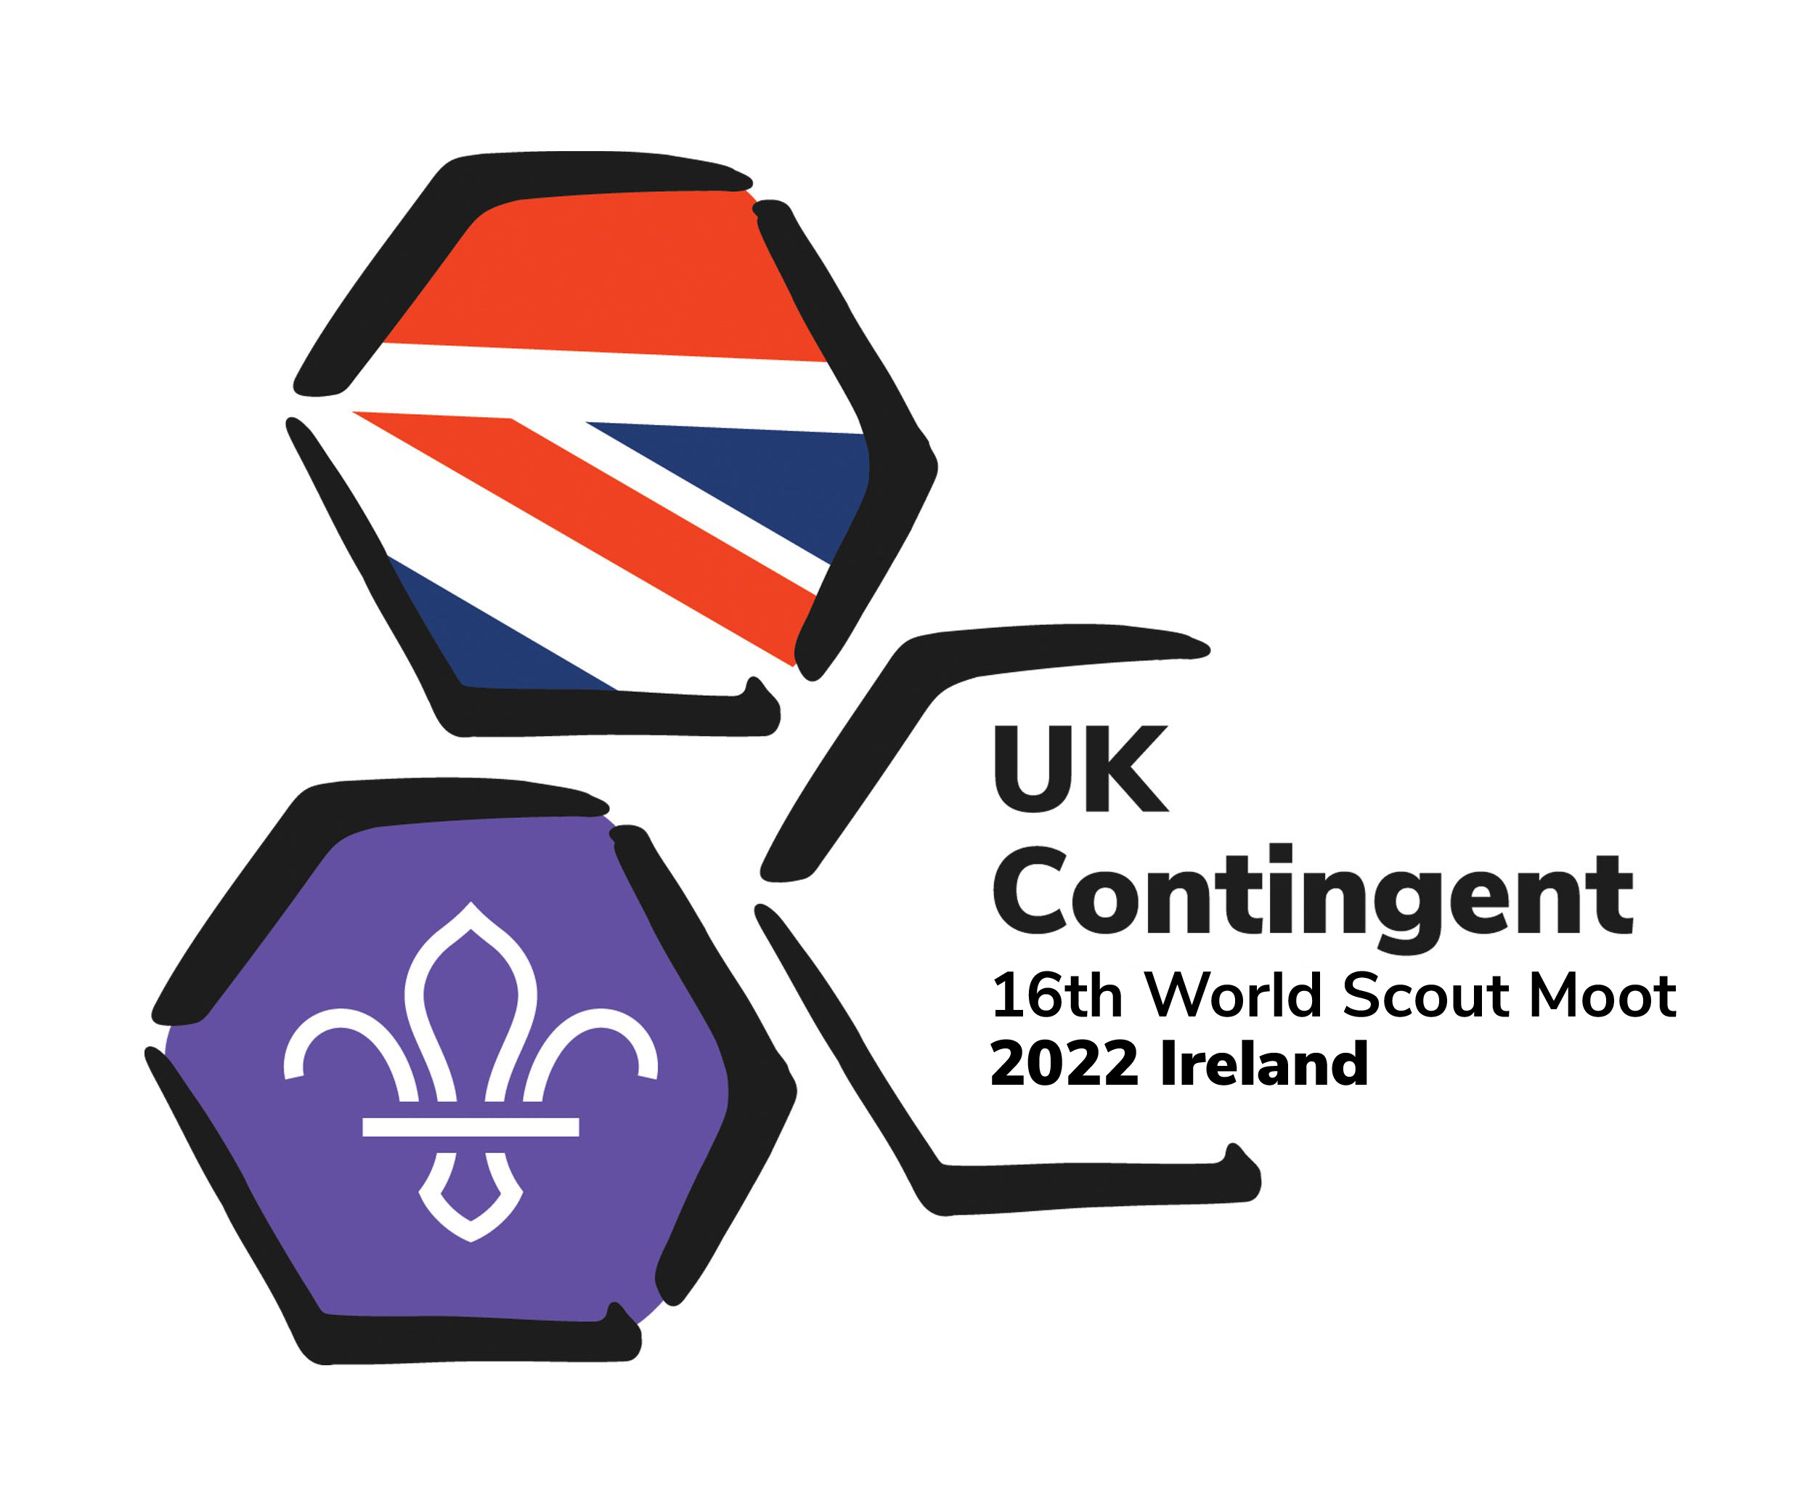 An image of the World Scout Moot 2022 logo which shows three hexagons 